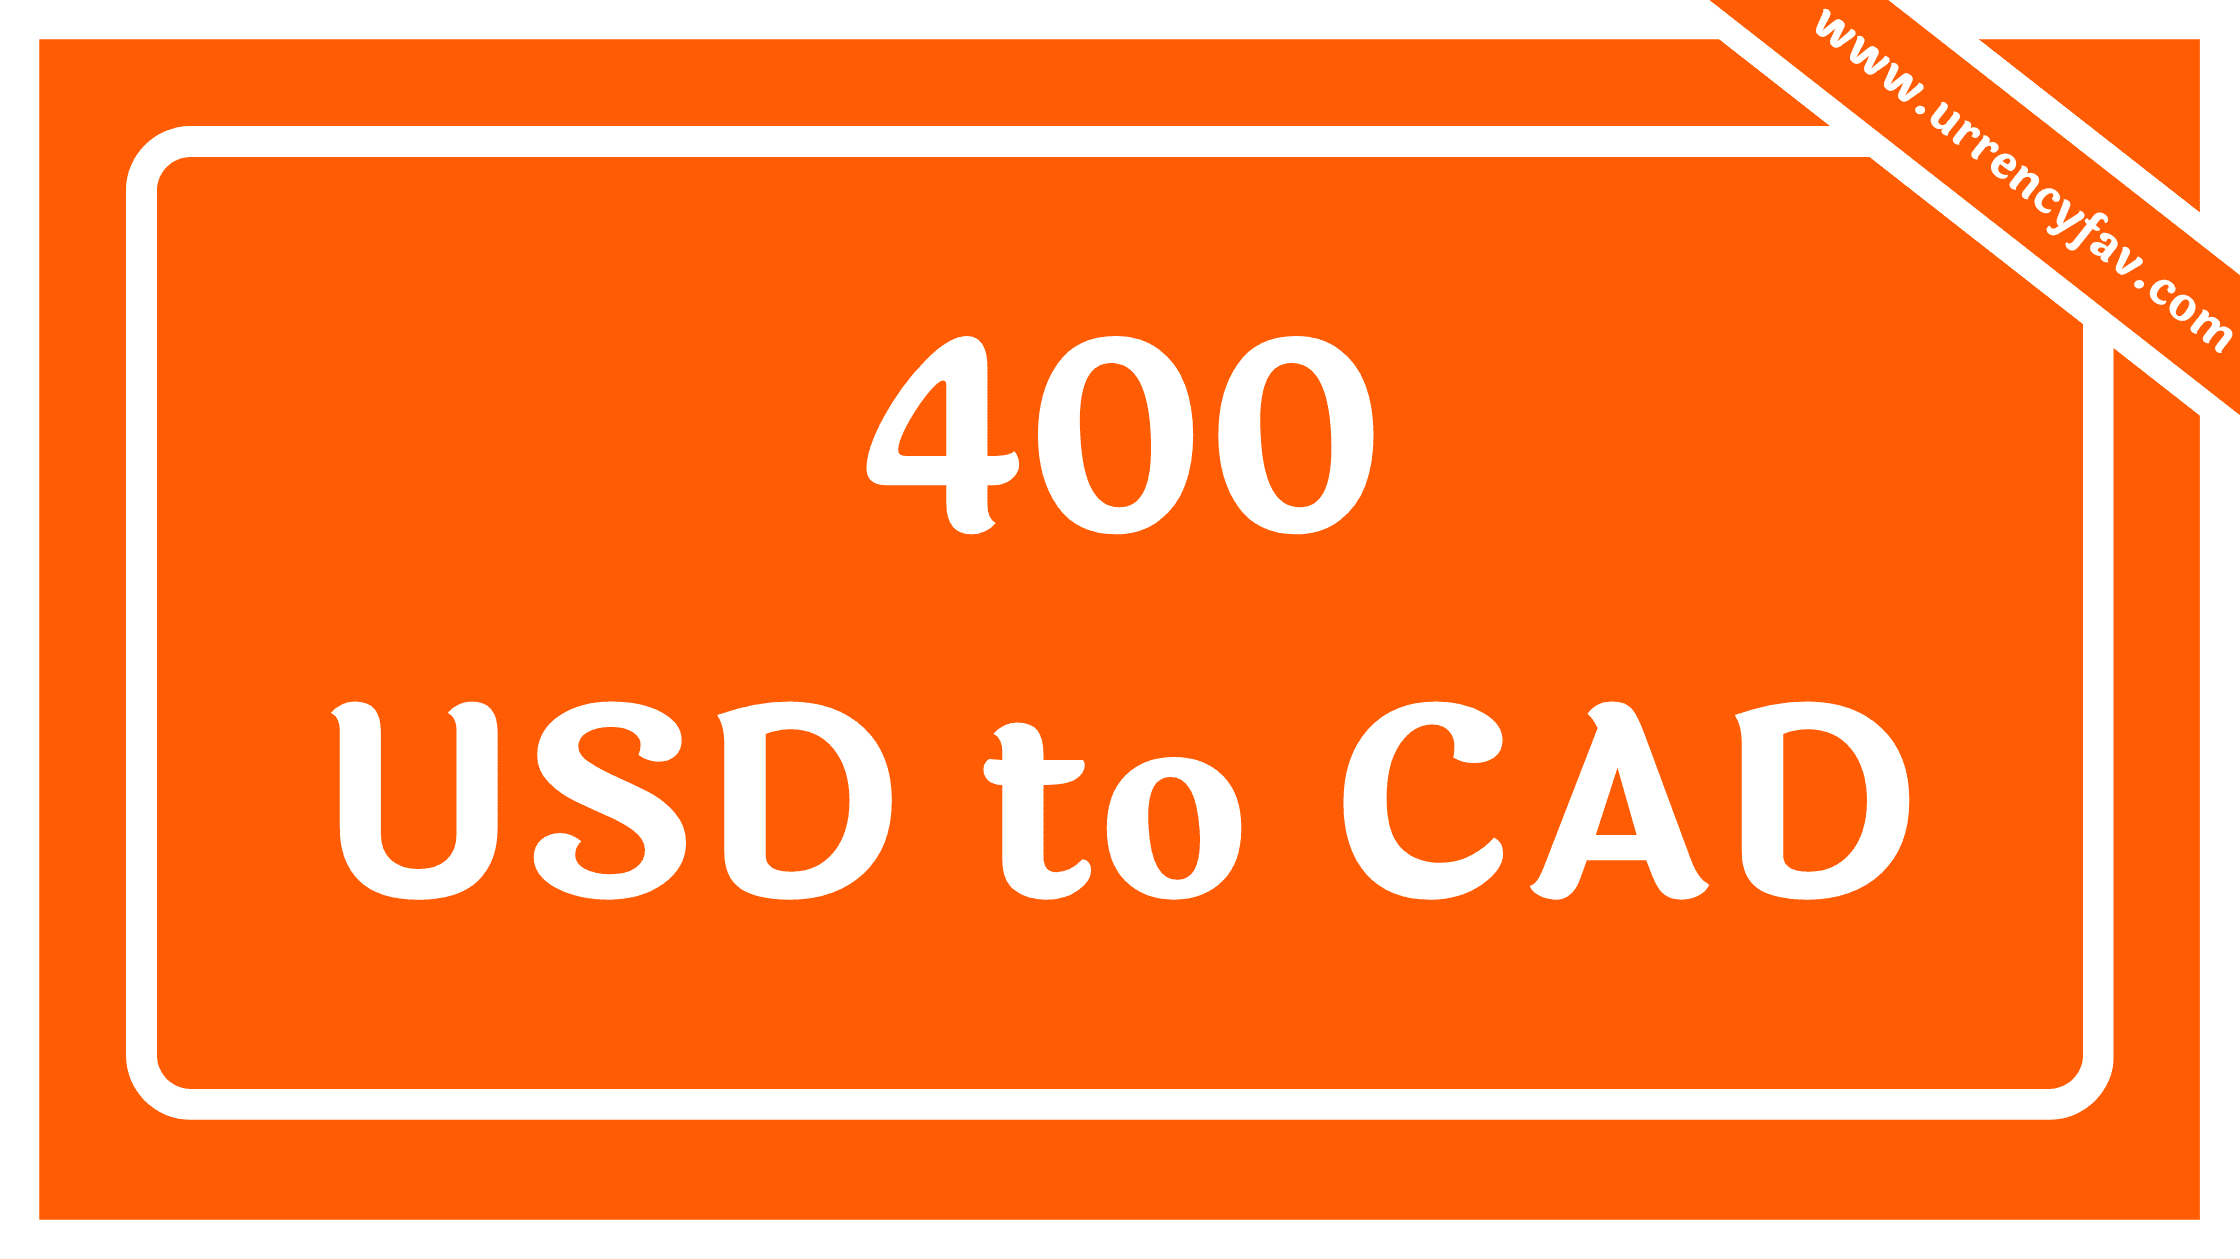 400 USD to CAD